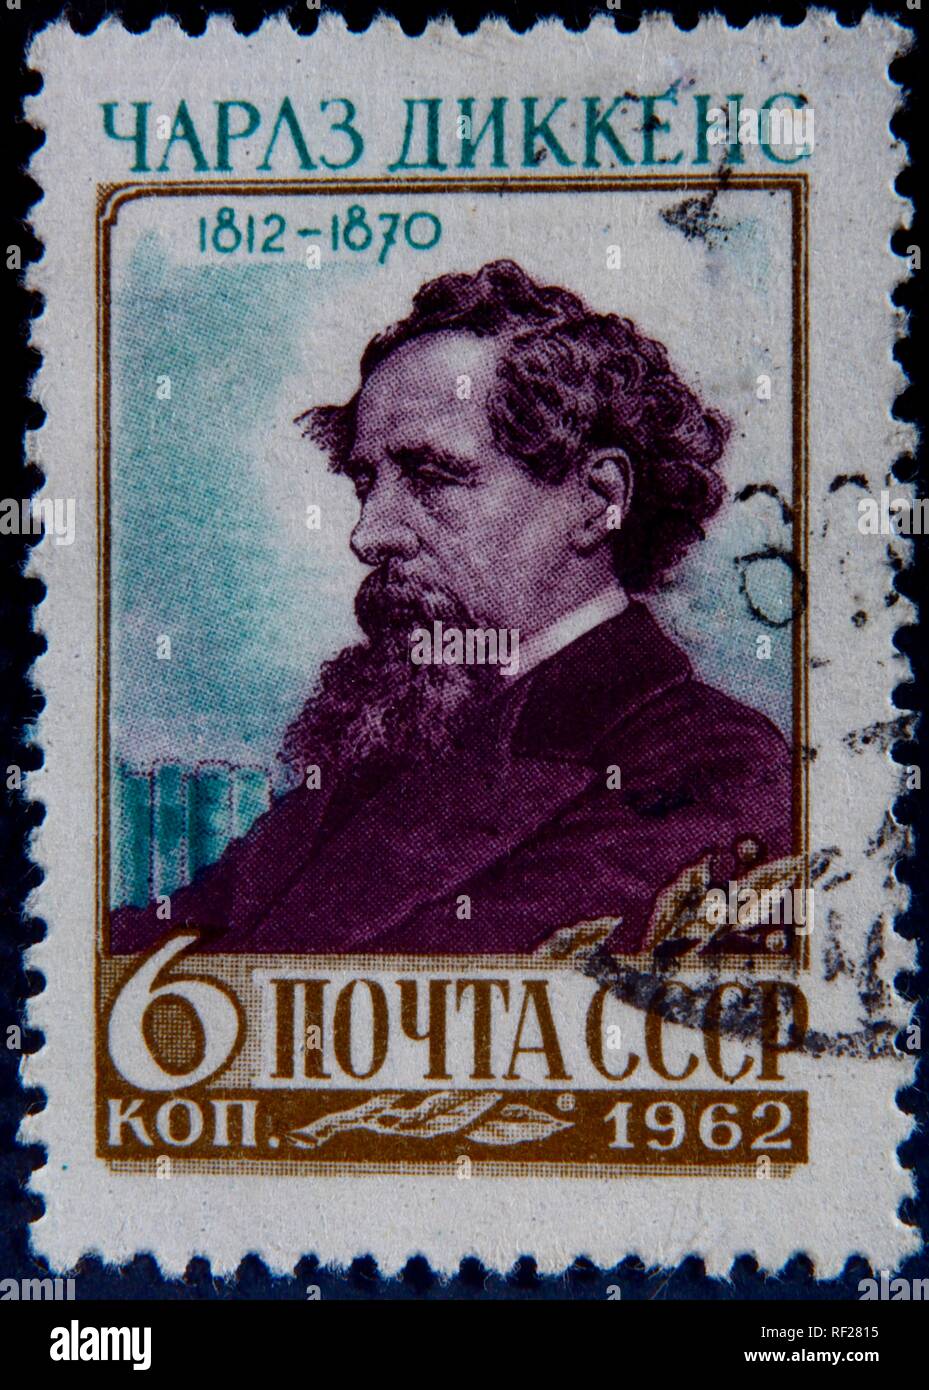 Charles Dickens, English writer, portrait on a Russian stamp, Sweden Stock Photo